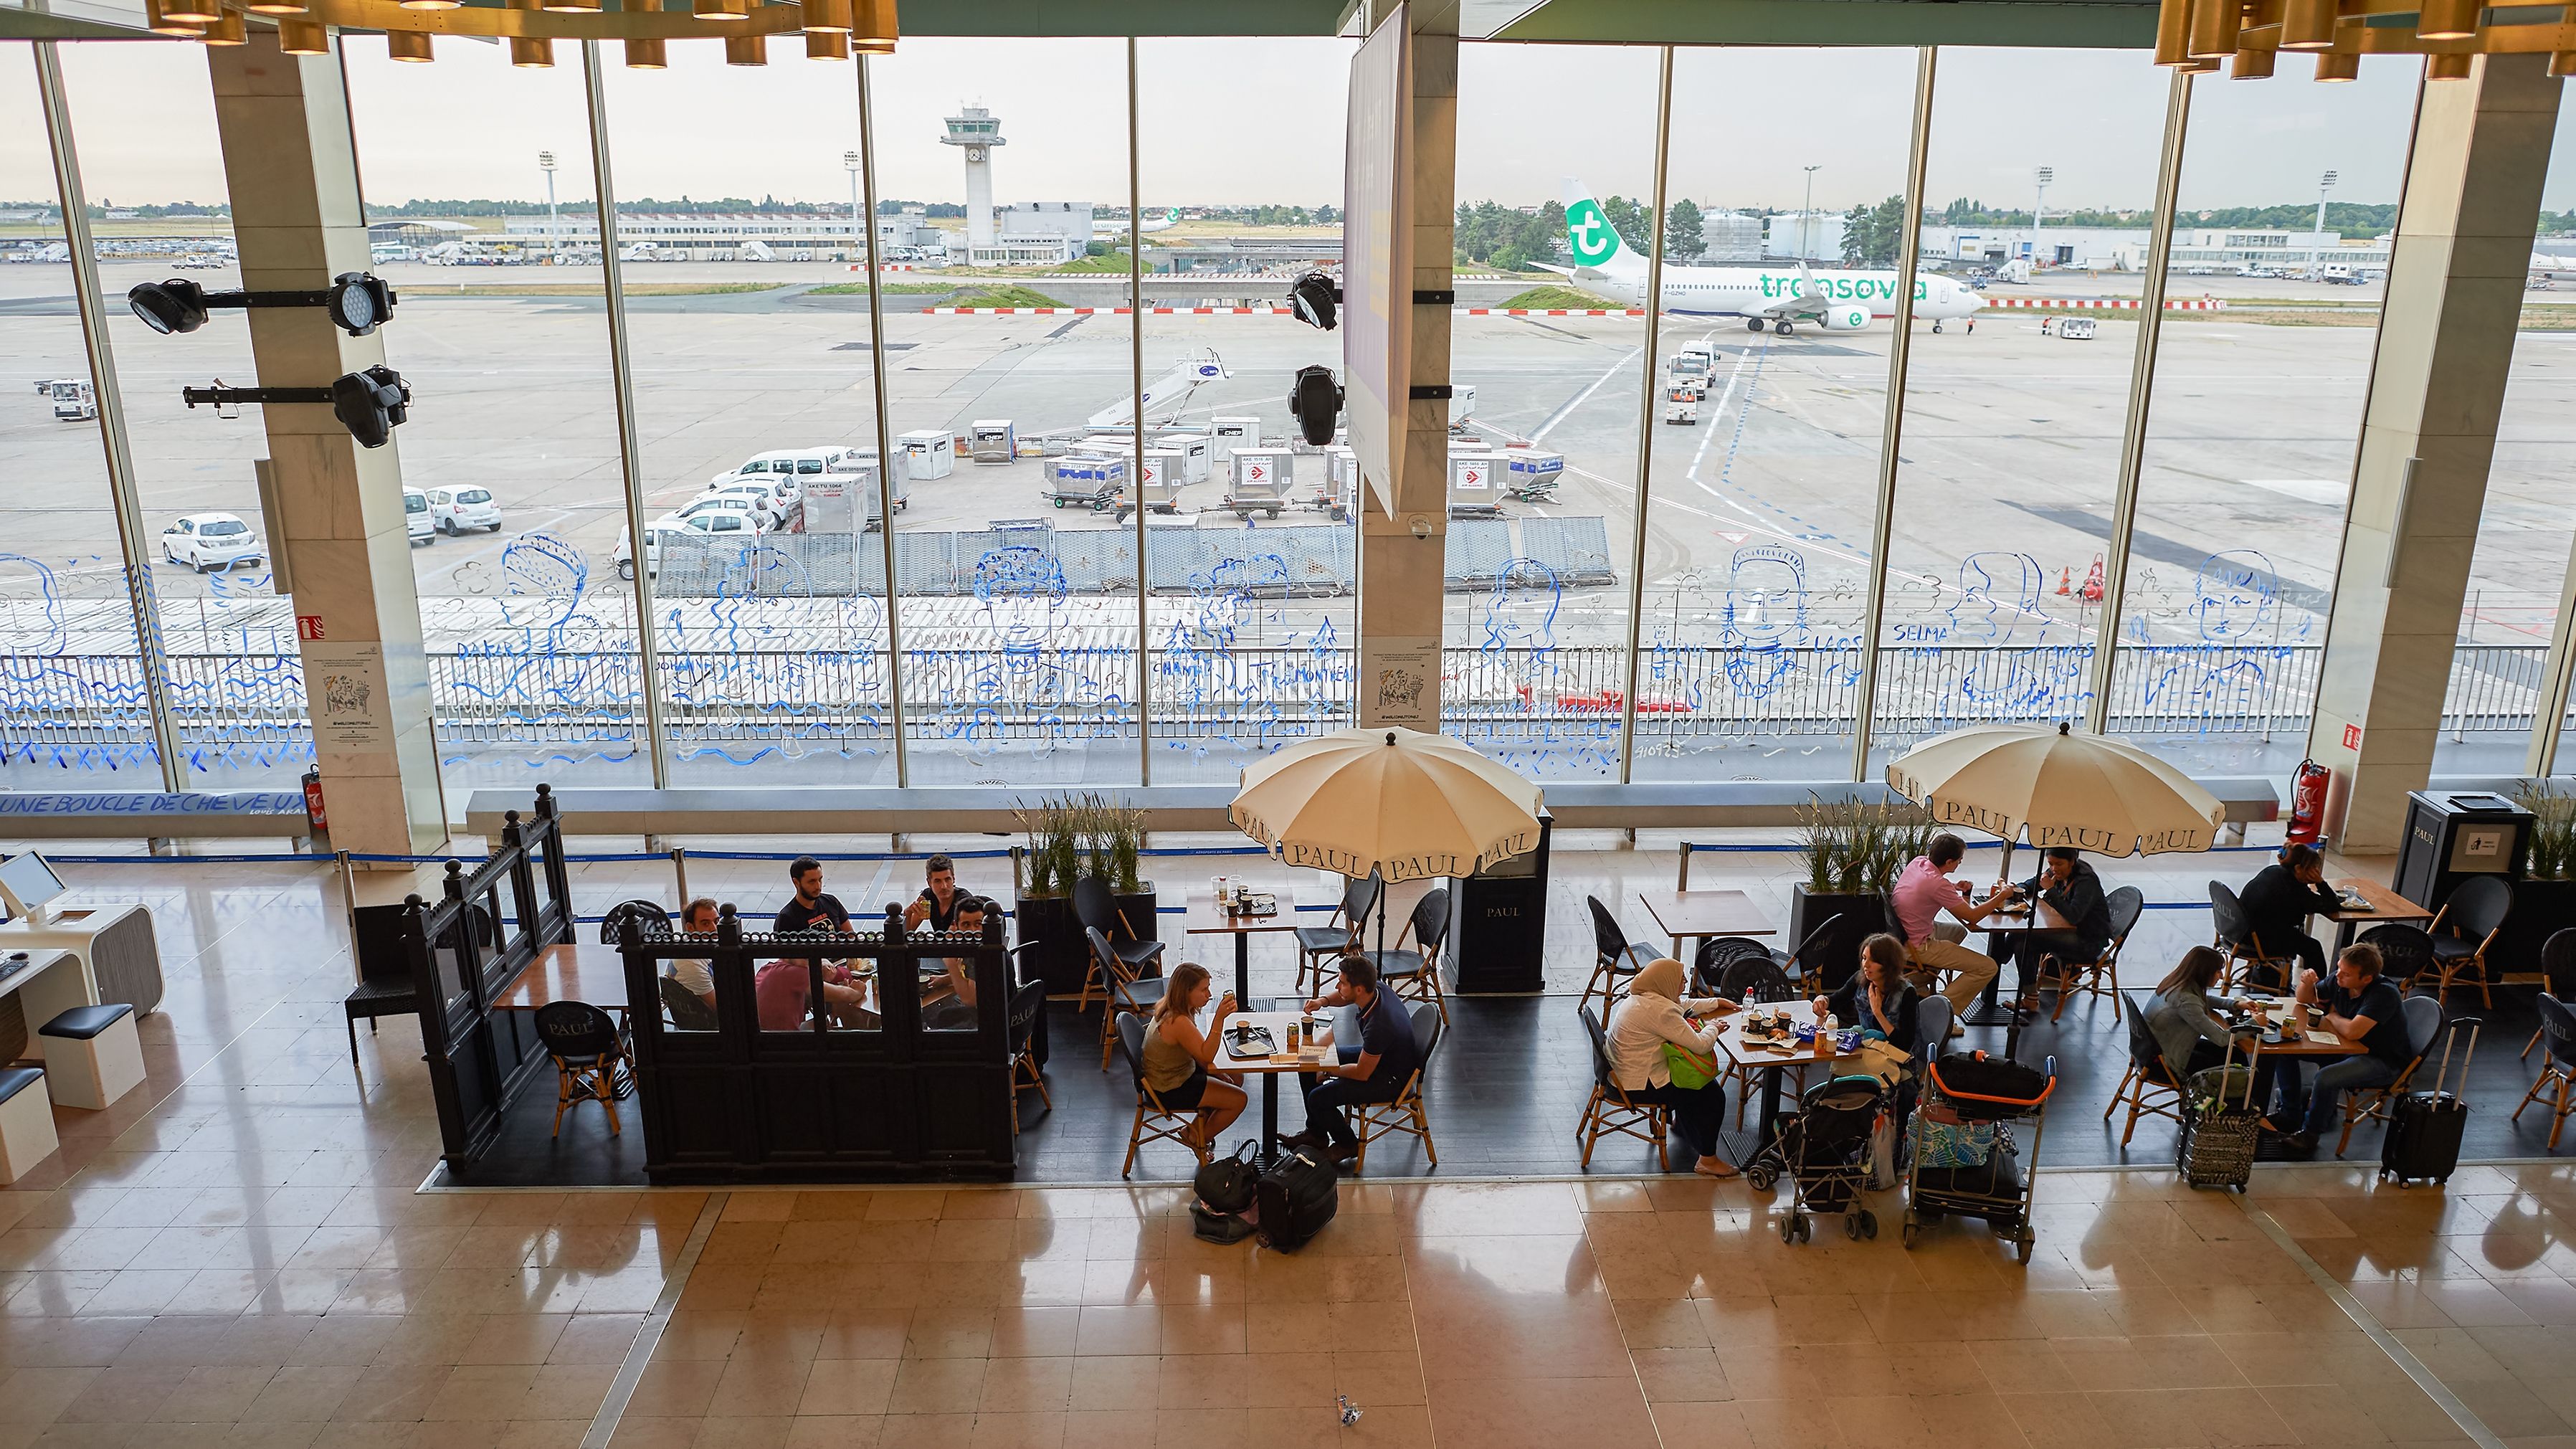 Passengers eating at a restaurant inside Paris Orly Airport.